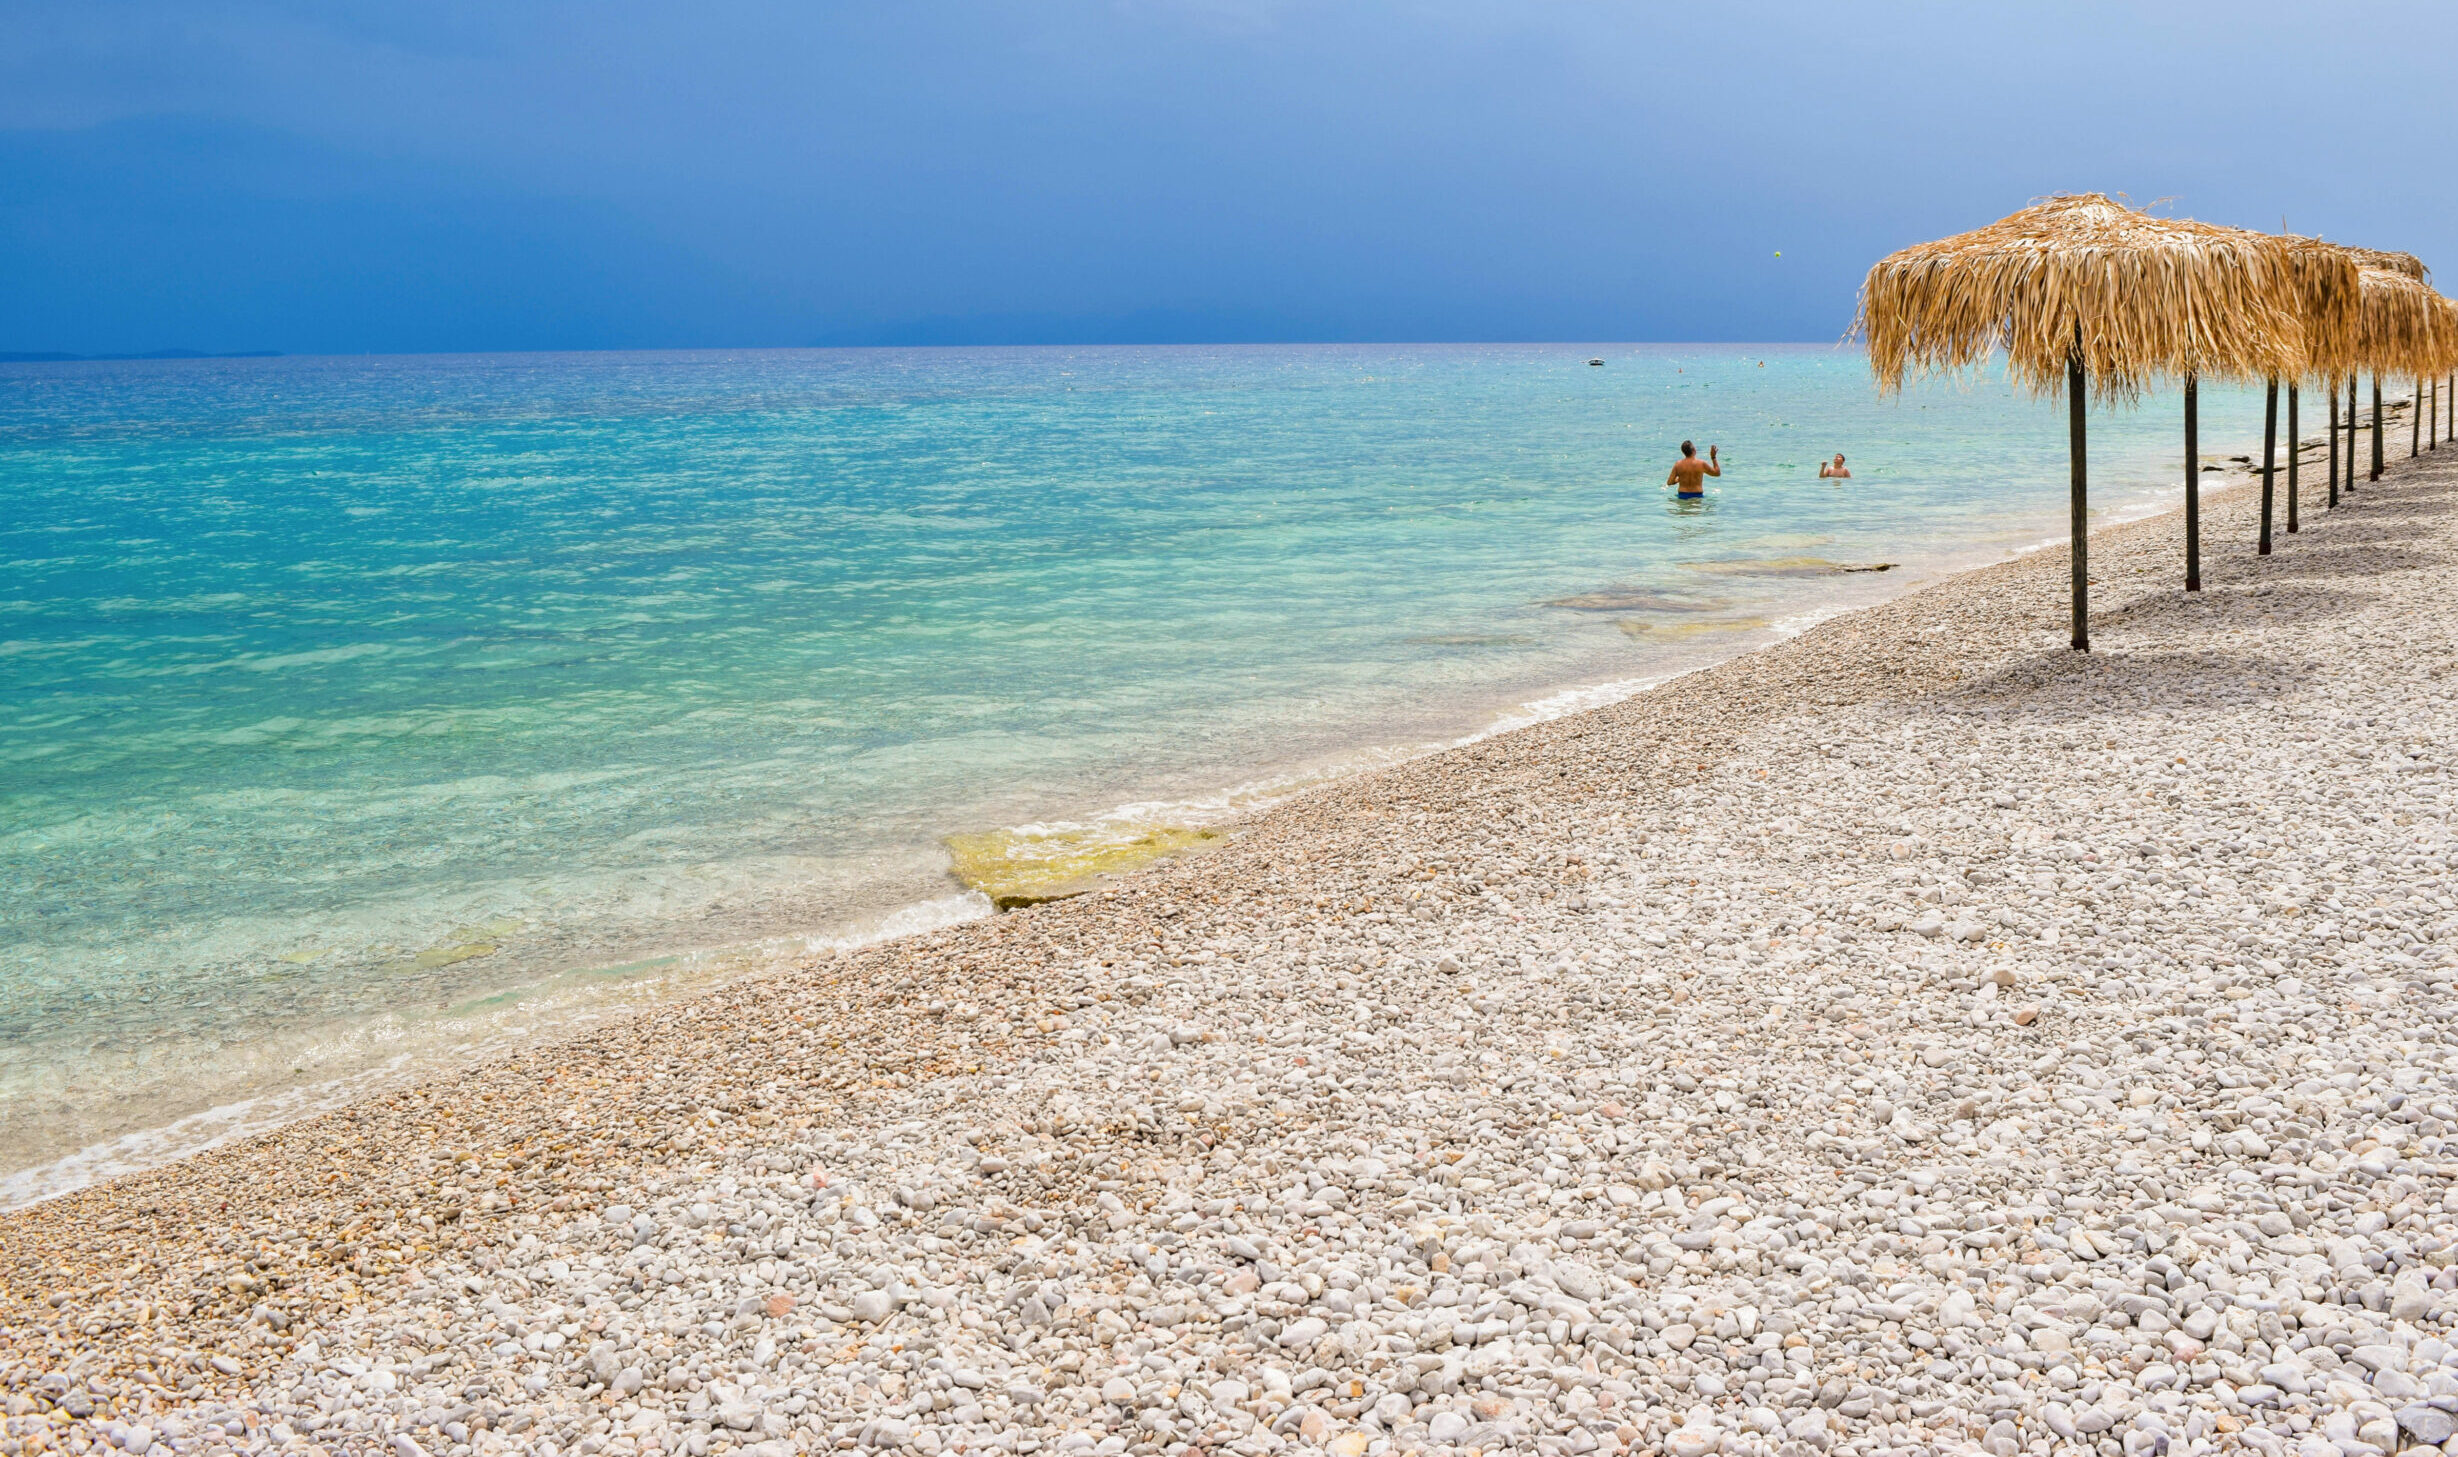 Corinthian Gulf beaches – ideal for day trips from Athens